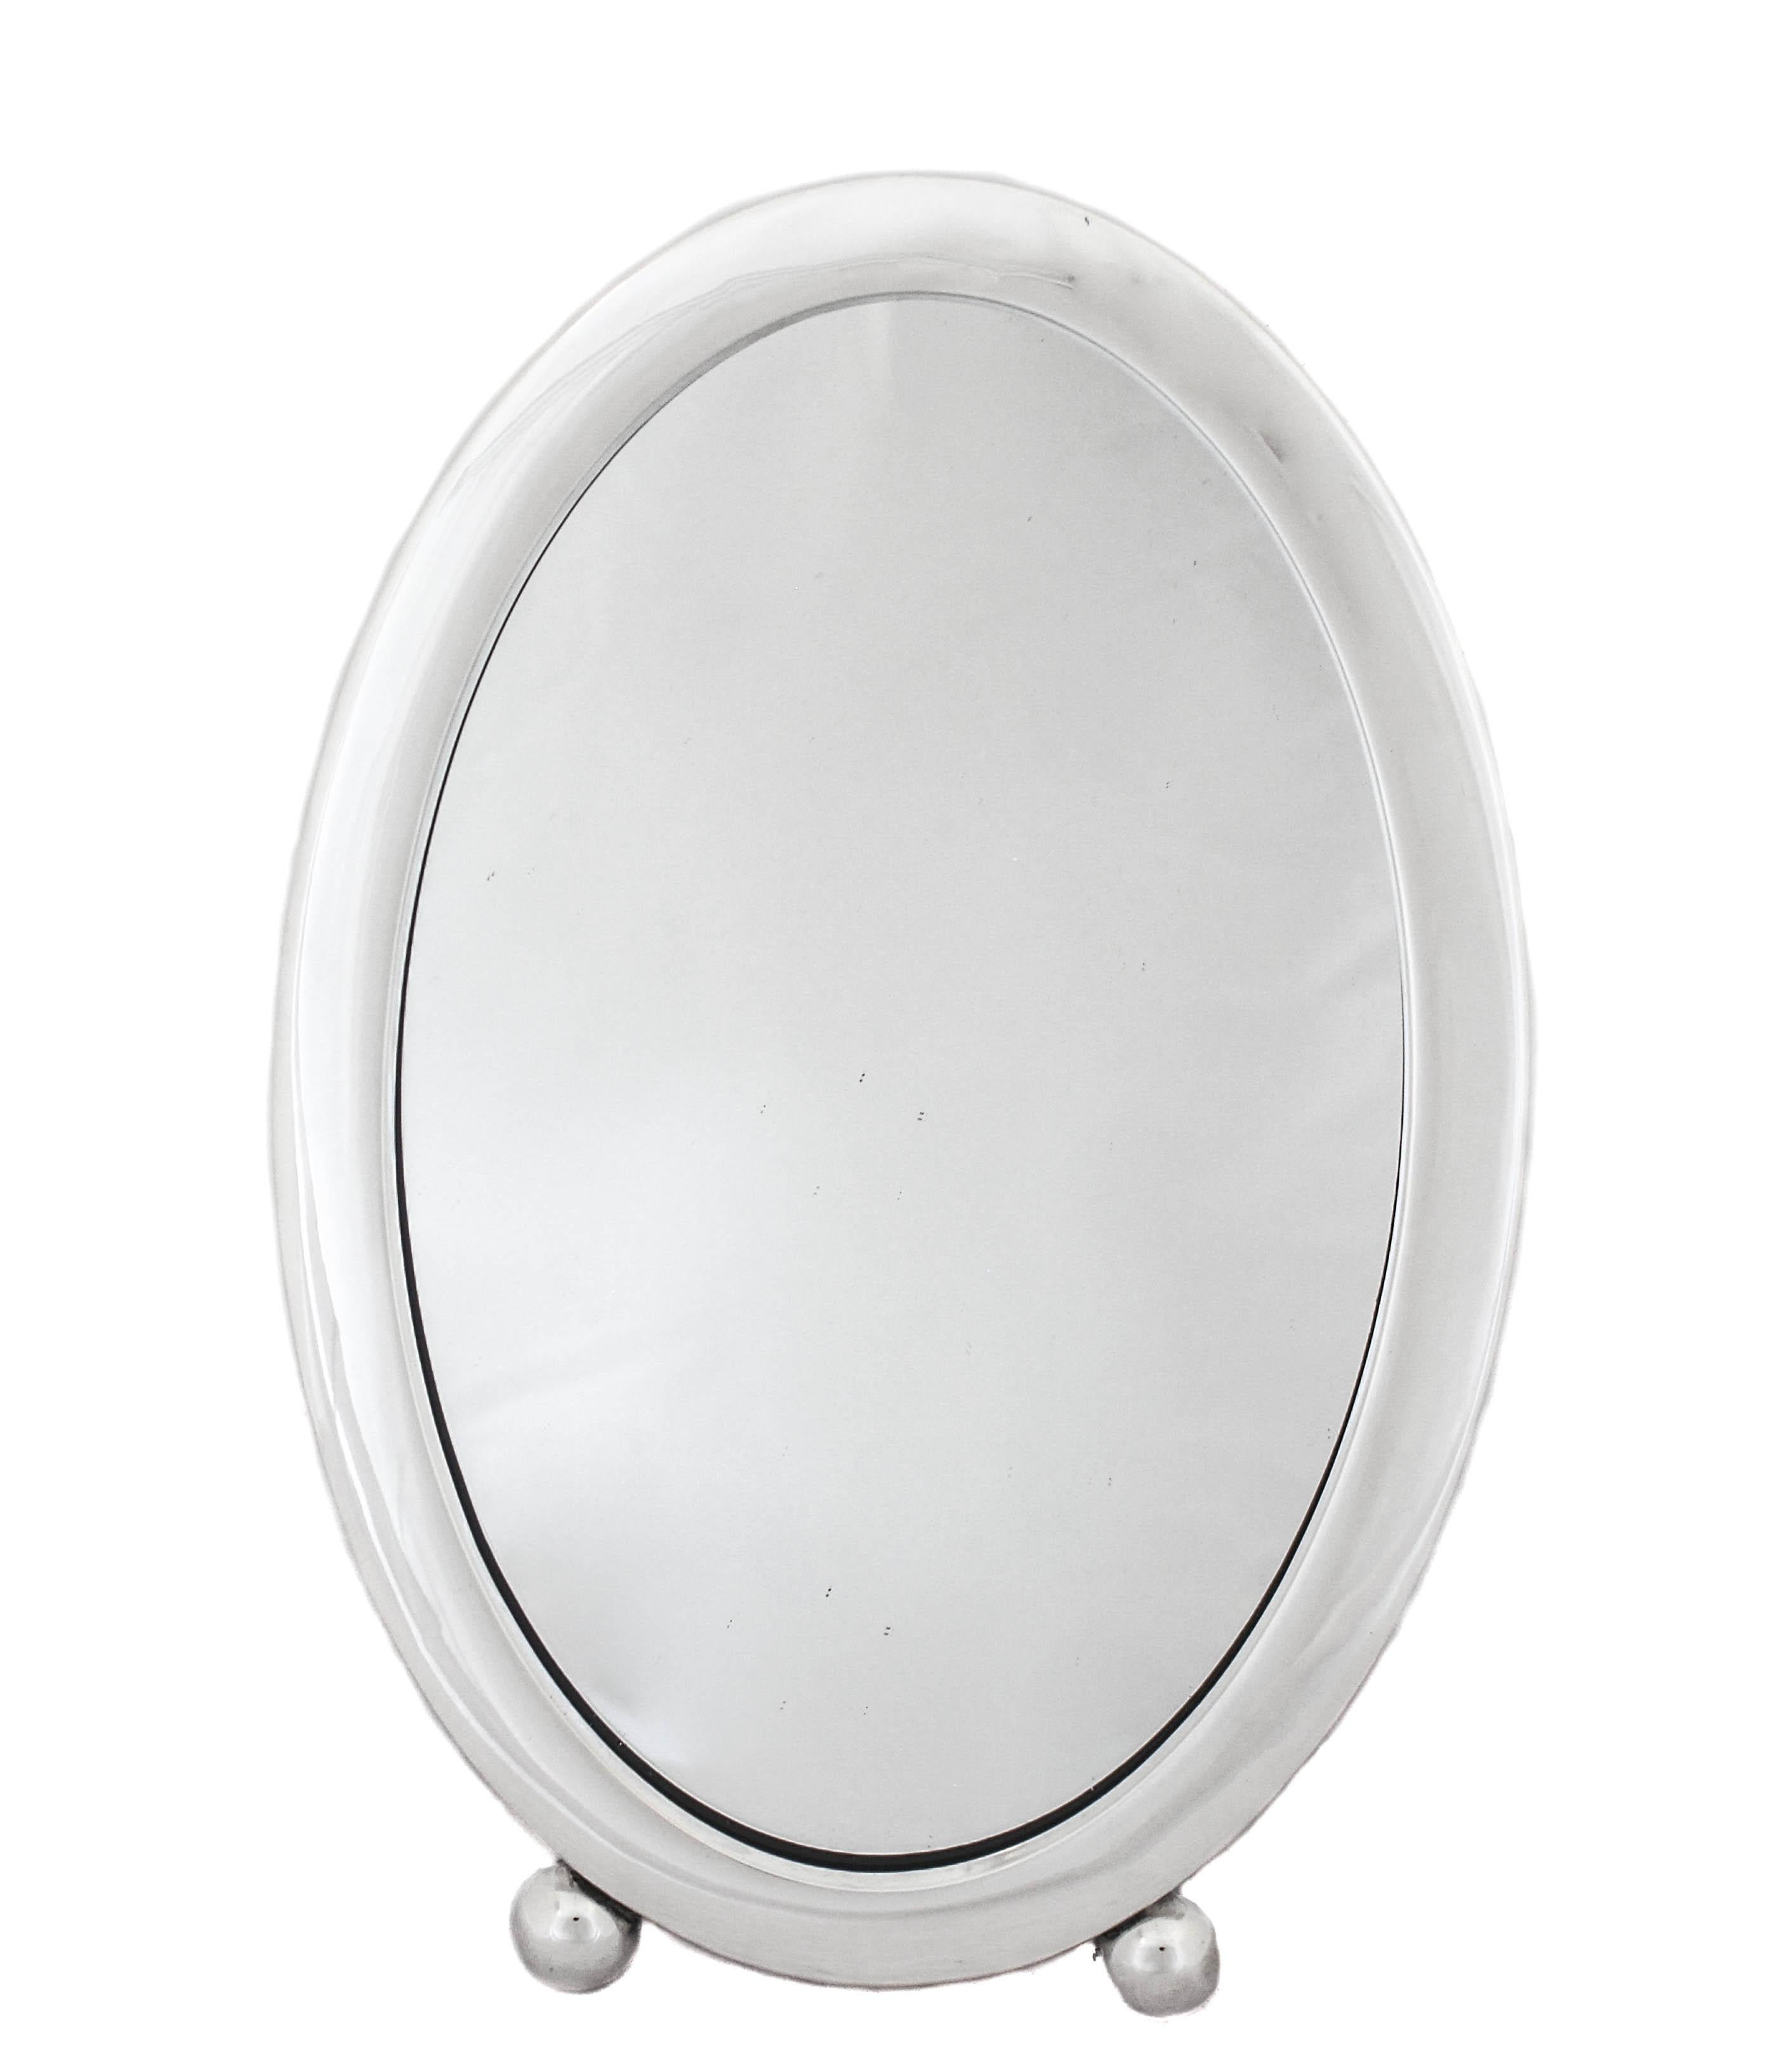 We are happy to offer you this sterling silver vanity mirror by J. F. Fradley & Company. It’s an uber-sleek table mirror that is contemporary and functional. It has two balls on the very bottom— an iconic Art Deco look that gives it an “edge”. The